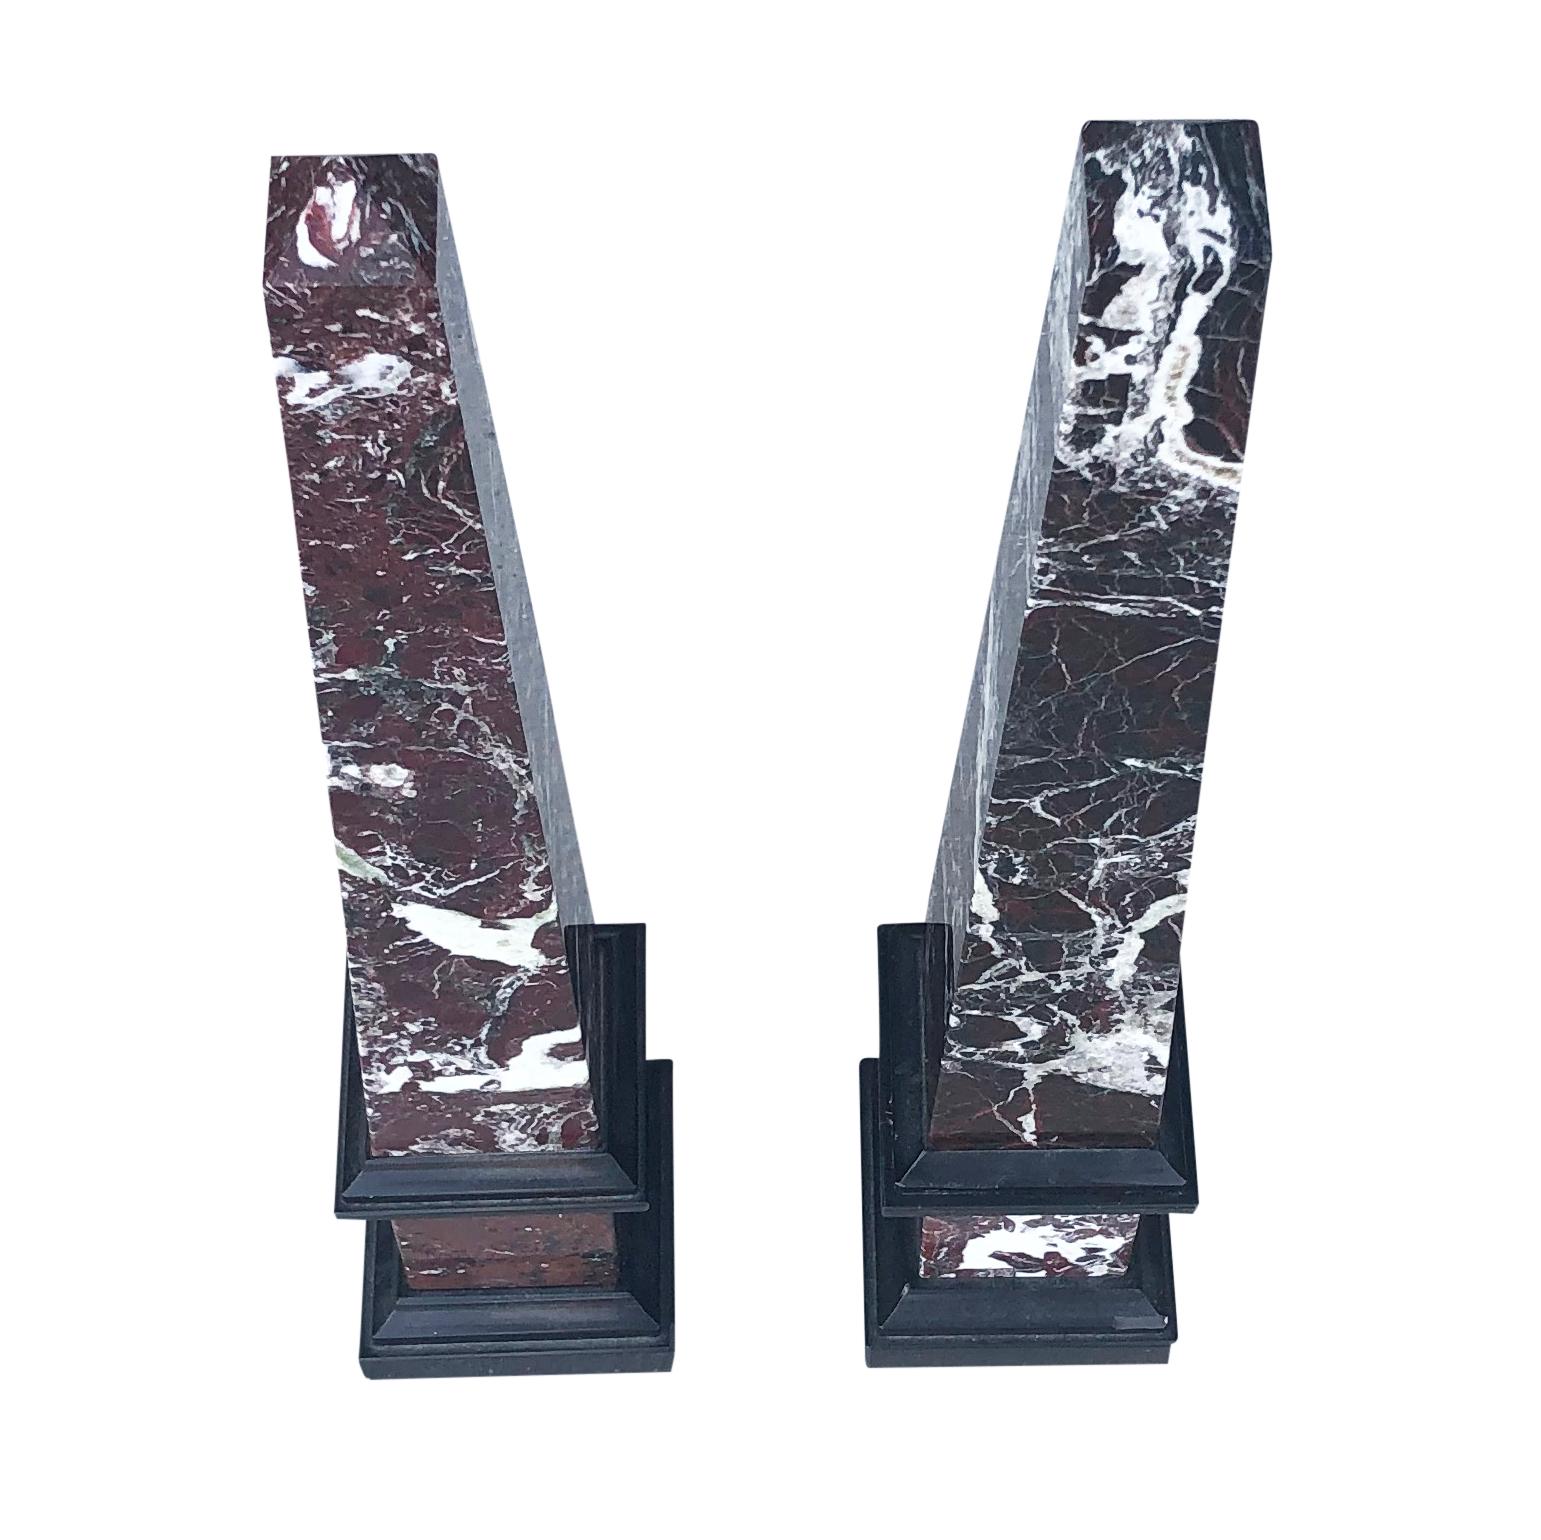 A vintage Mid-Century Modern Italian architectural pair of decorative hand carved table pyramid obelisks in Italian Rosso Levanto marble on a square black marble base, richly polished for a high gloss finish, in good condition. Wear consistent with